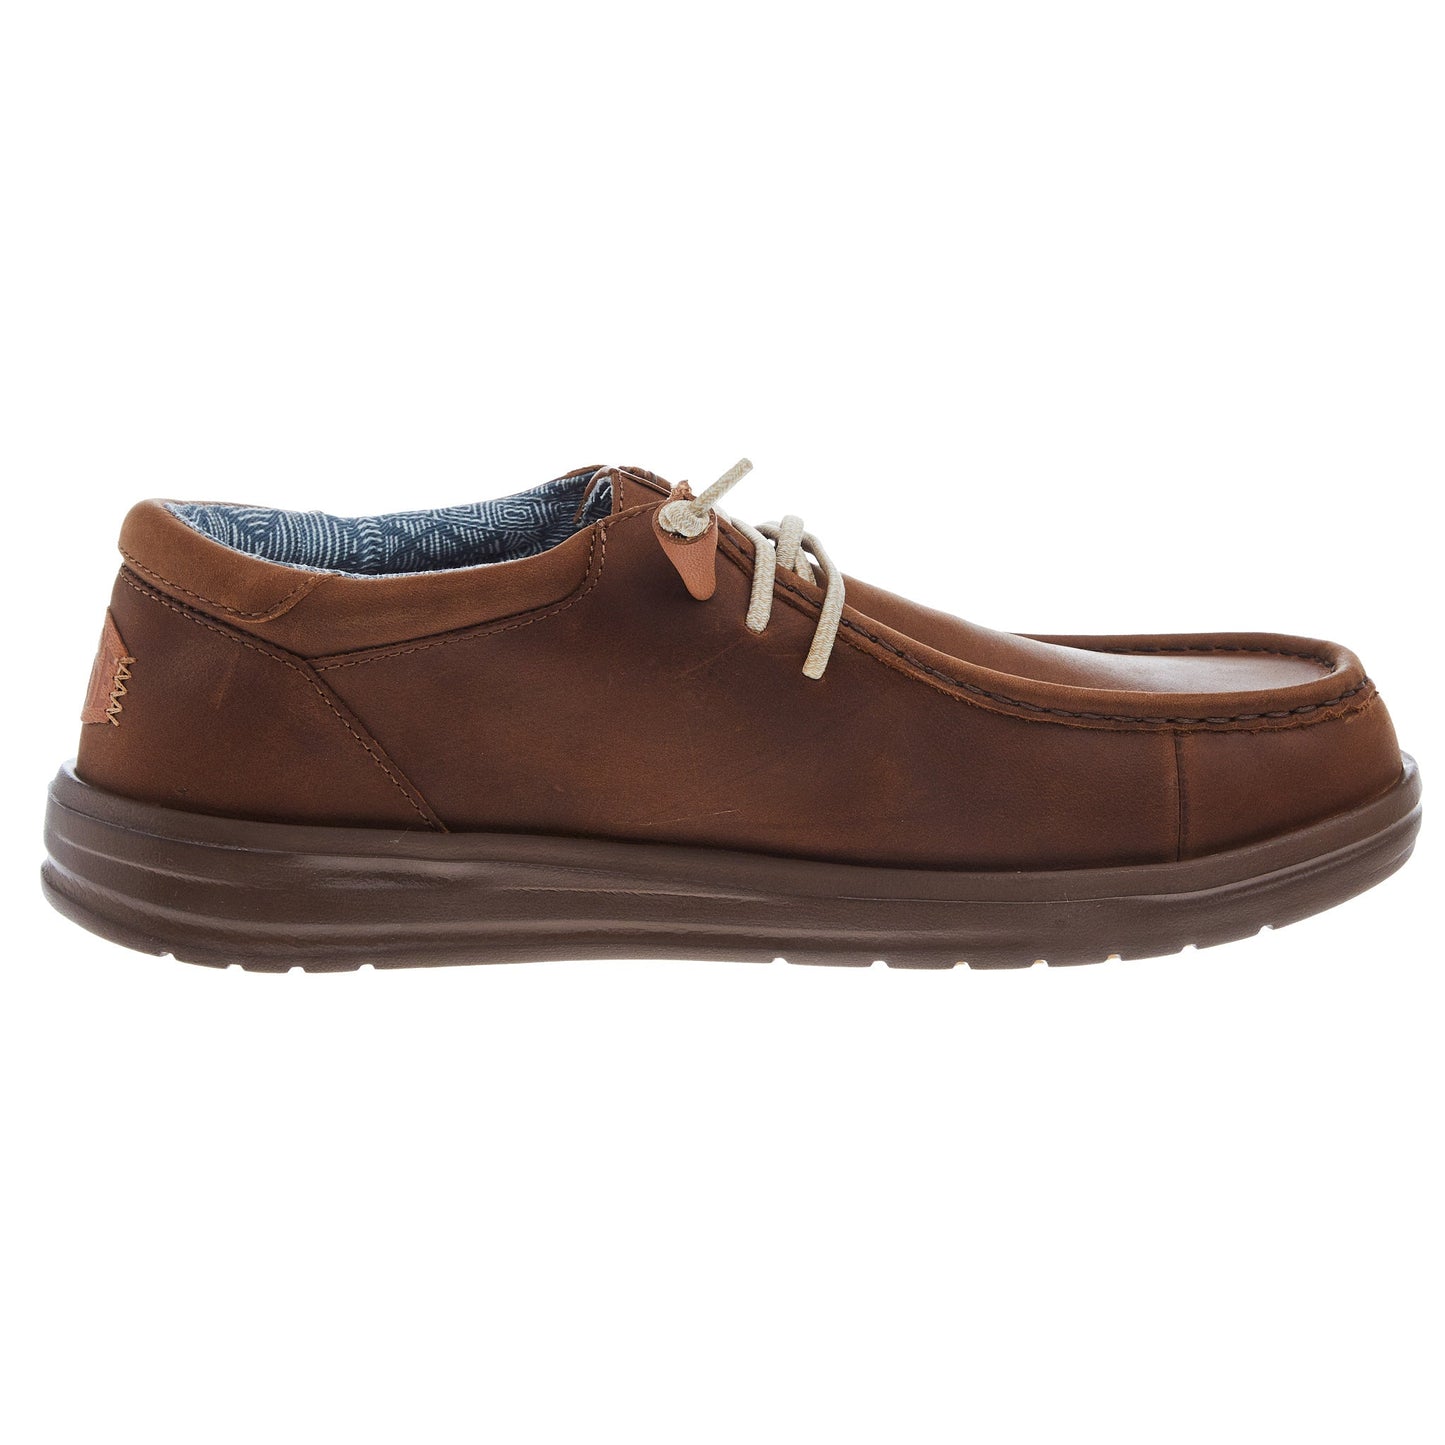 Wally Grip Craft Leather in Brown by Hey Dude Shoes